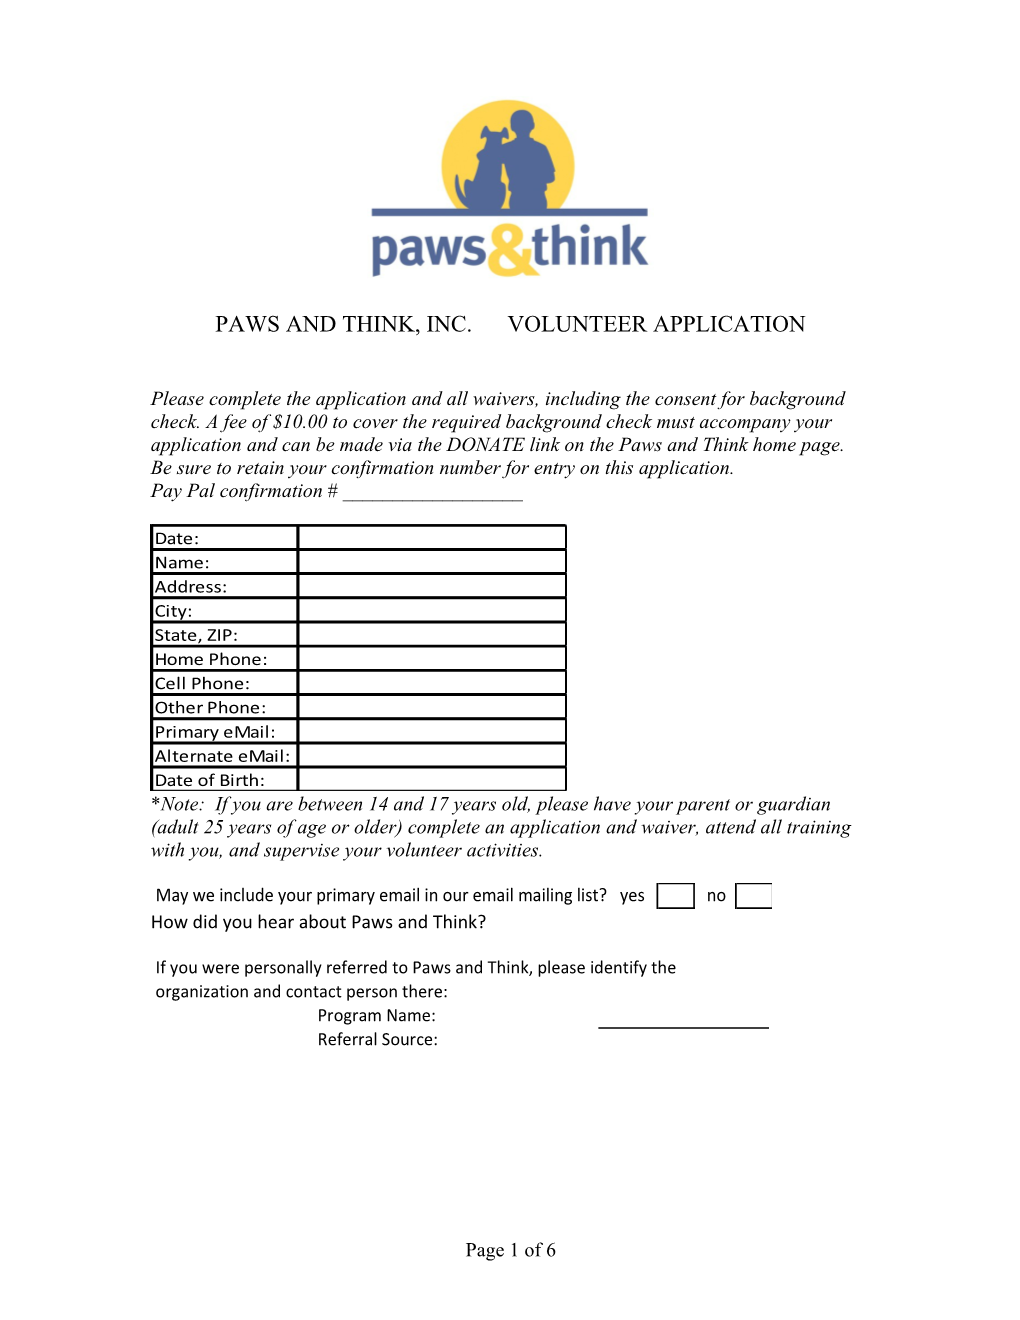 Paws and Think, Inc. Volunteer Application